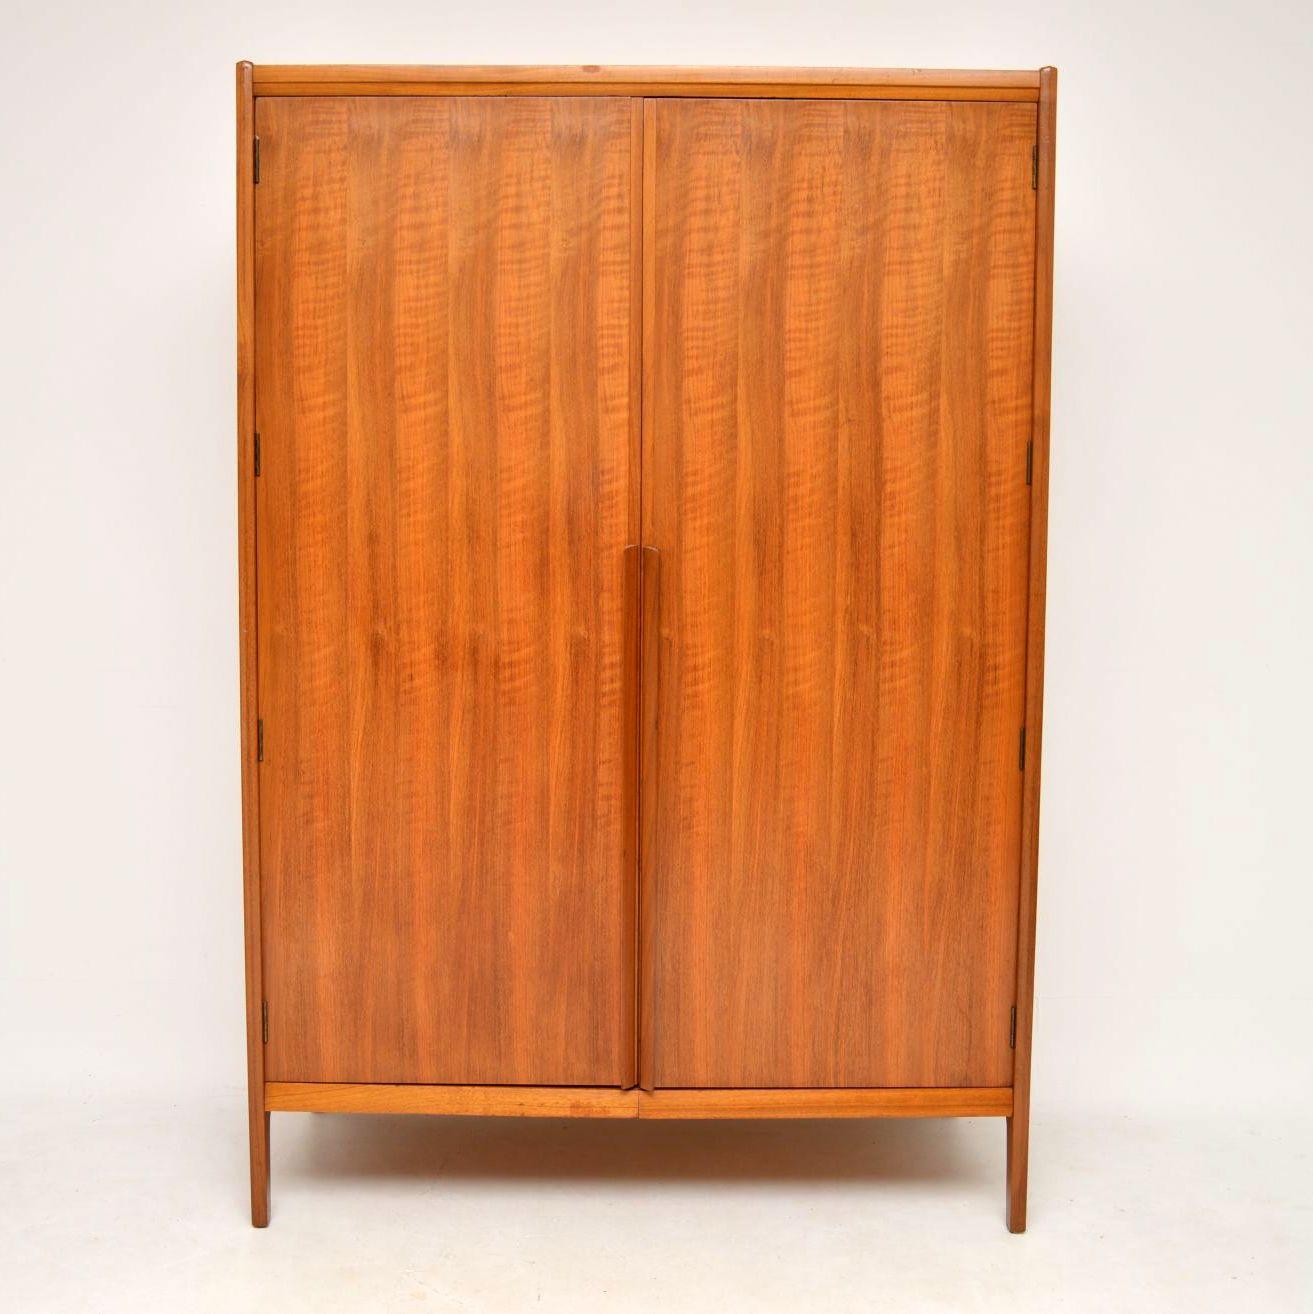 A beautifully made and very rare vintage wardrobe in walnut, this was made by Younger, it dates from the 1960s. It has a beautiful Minimalist design, with a gorgeous color and stunning walnut grain patterns. The condition is excellent for its age,